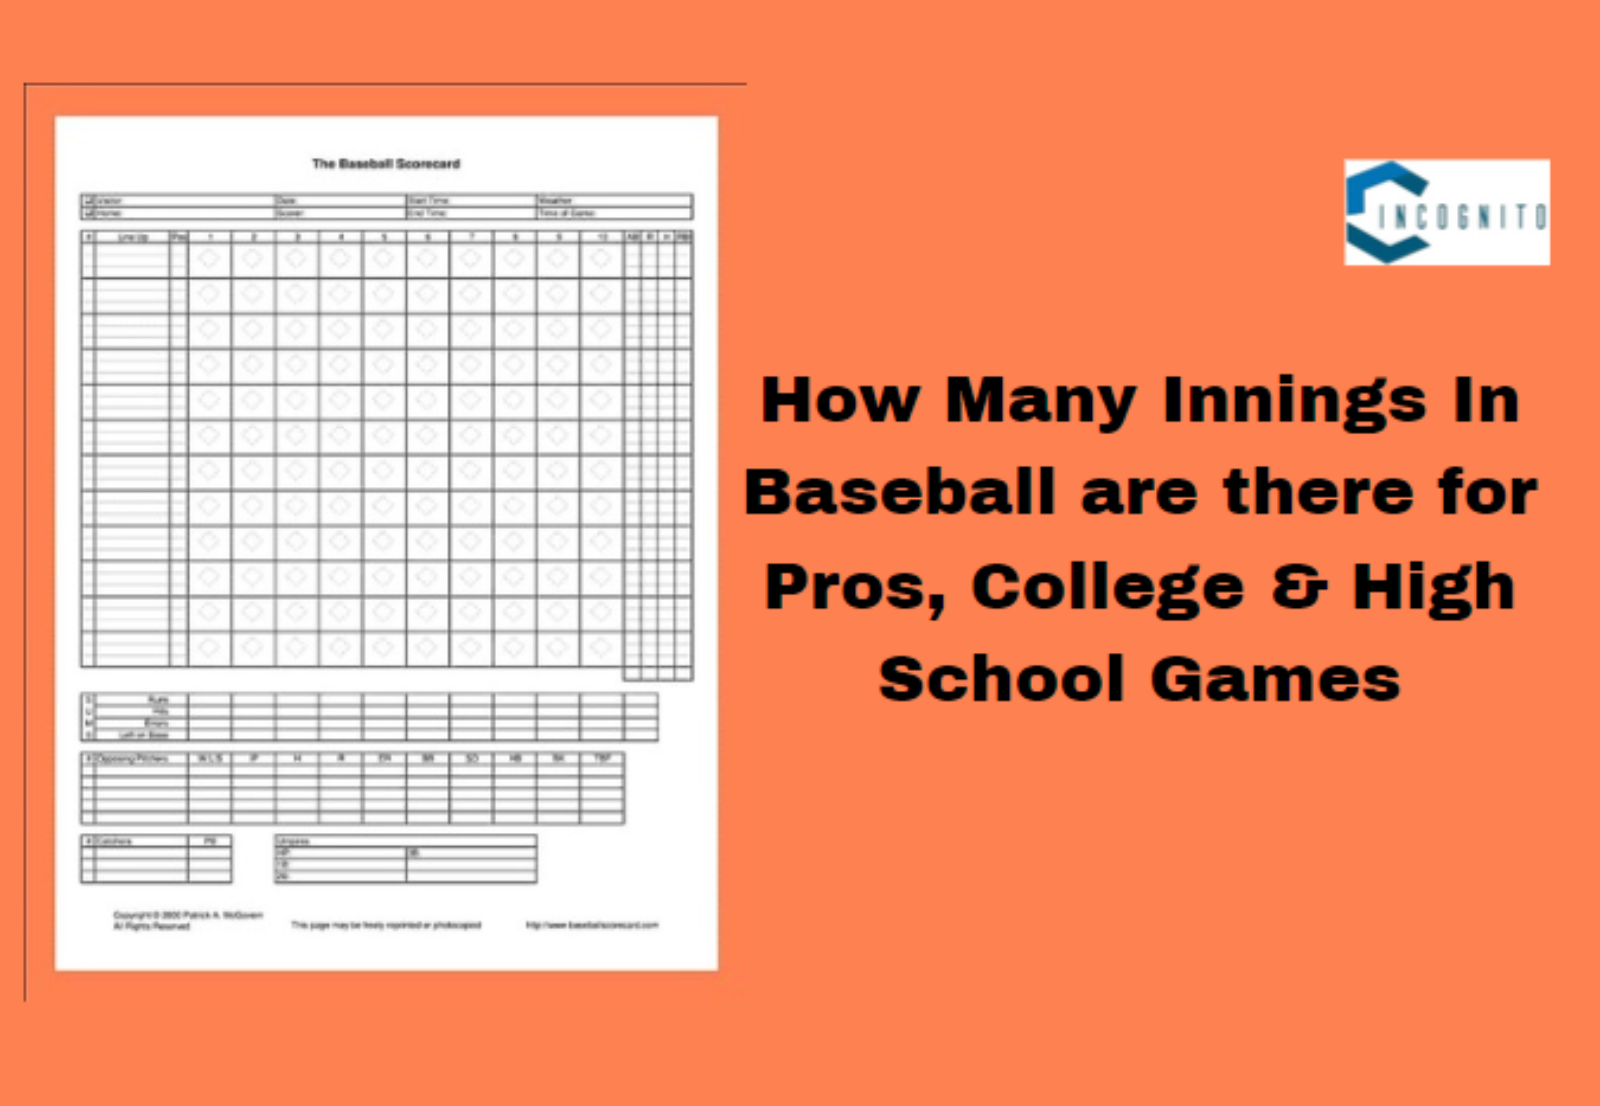 How Many Innings In Baseball Are There for Pros, College & High School Games